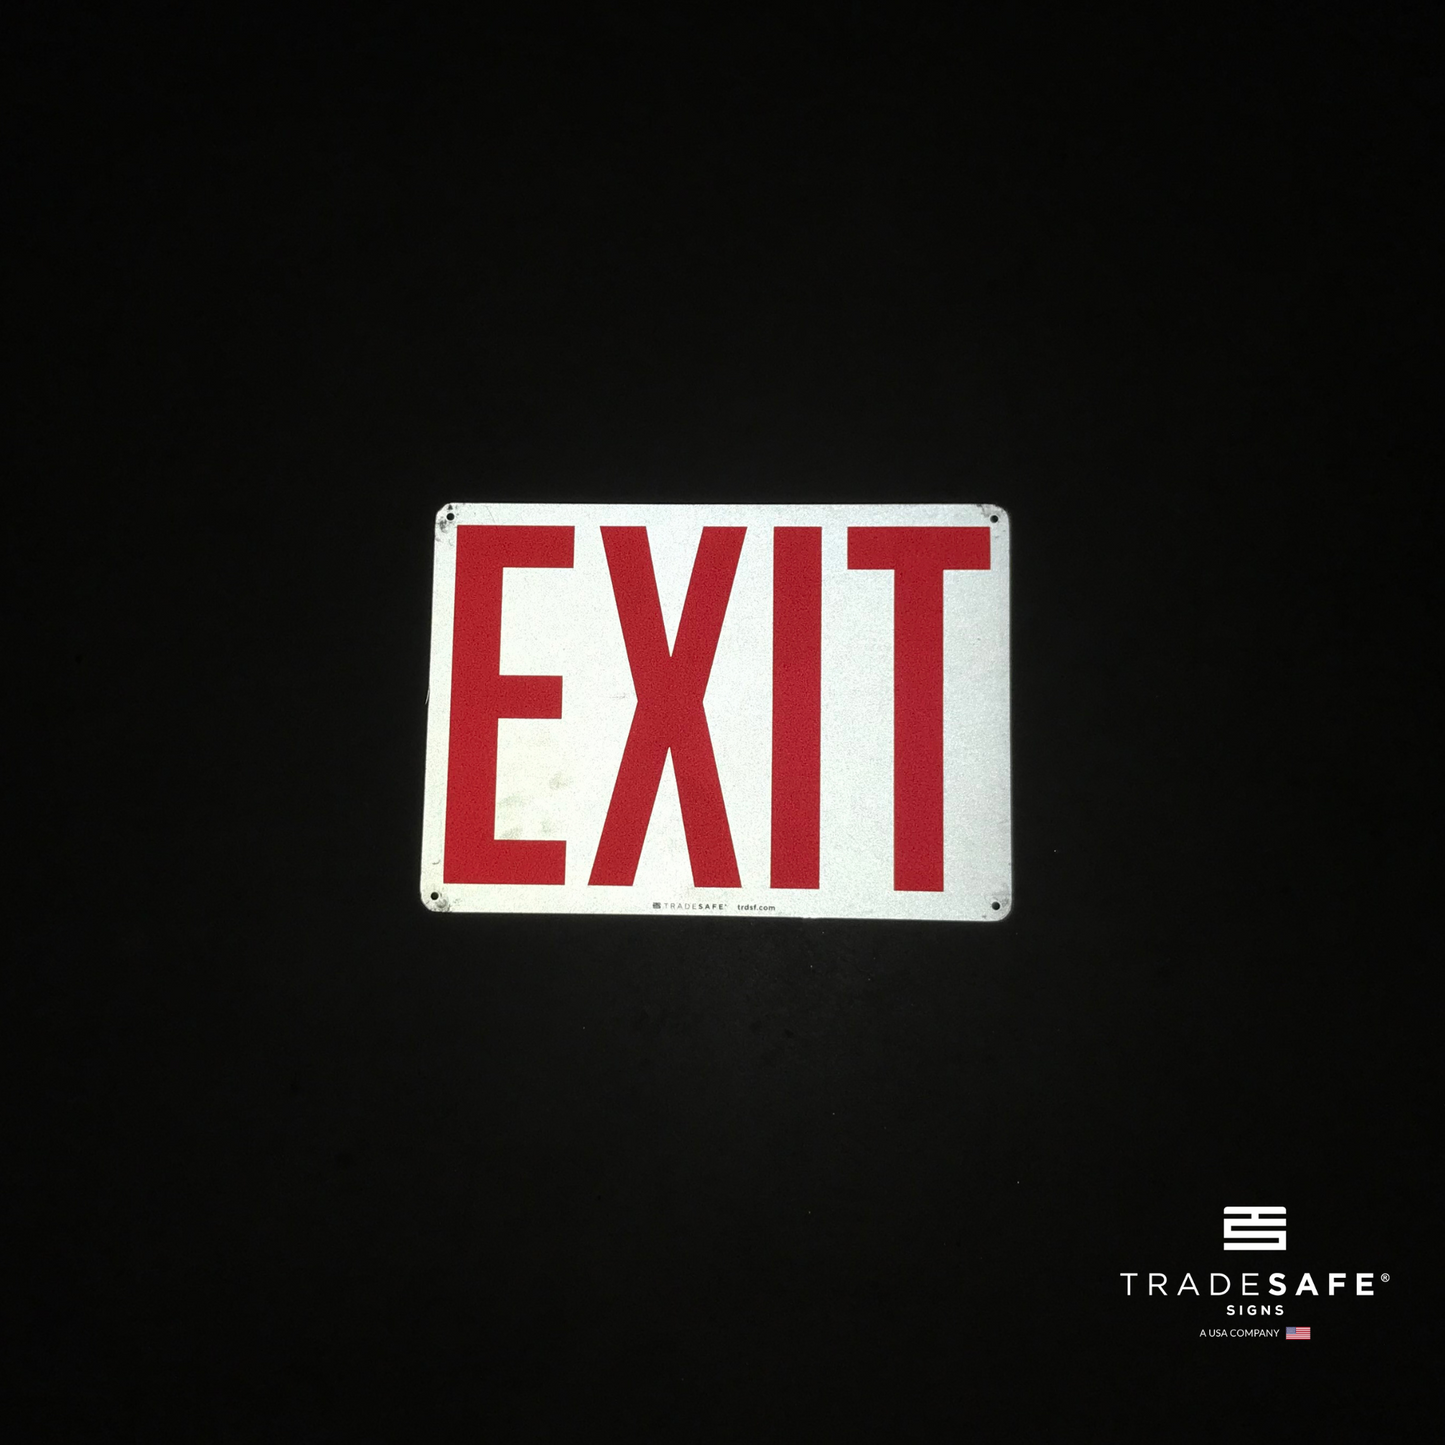 reflective attribute of exit sign on black background